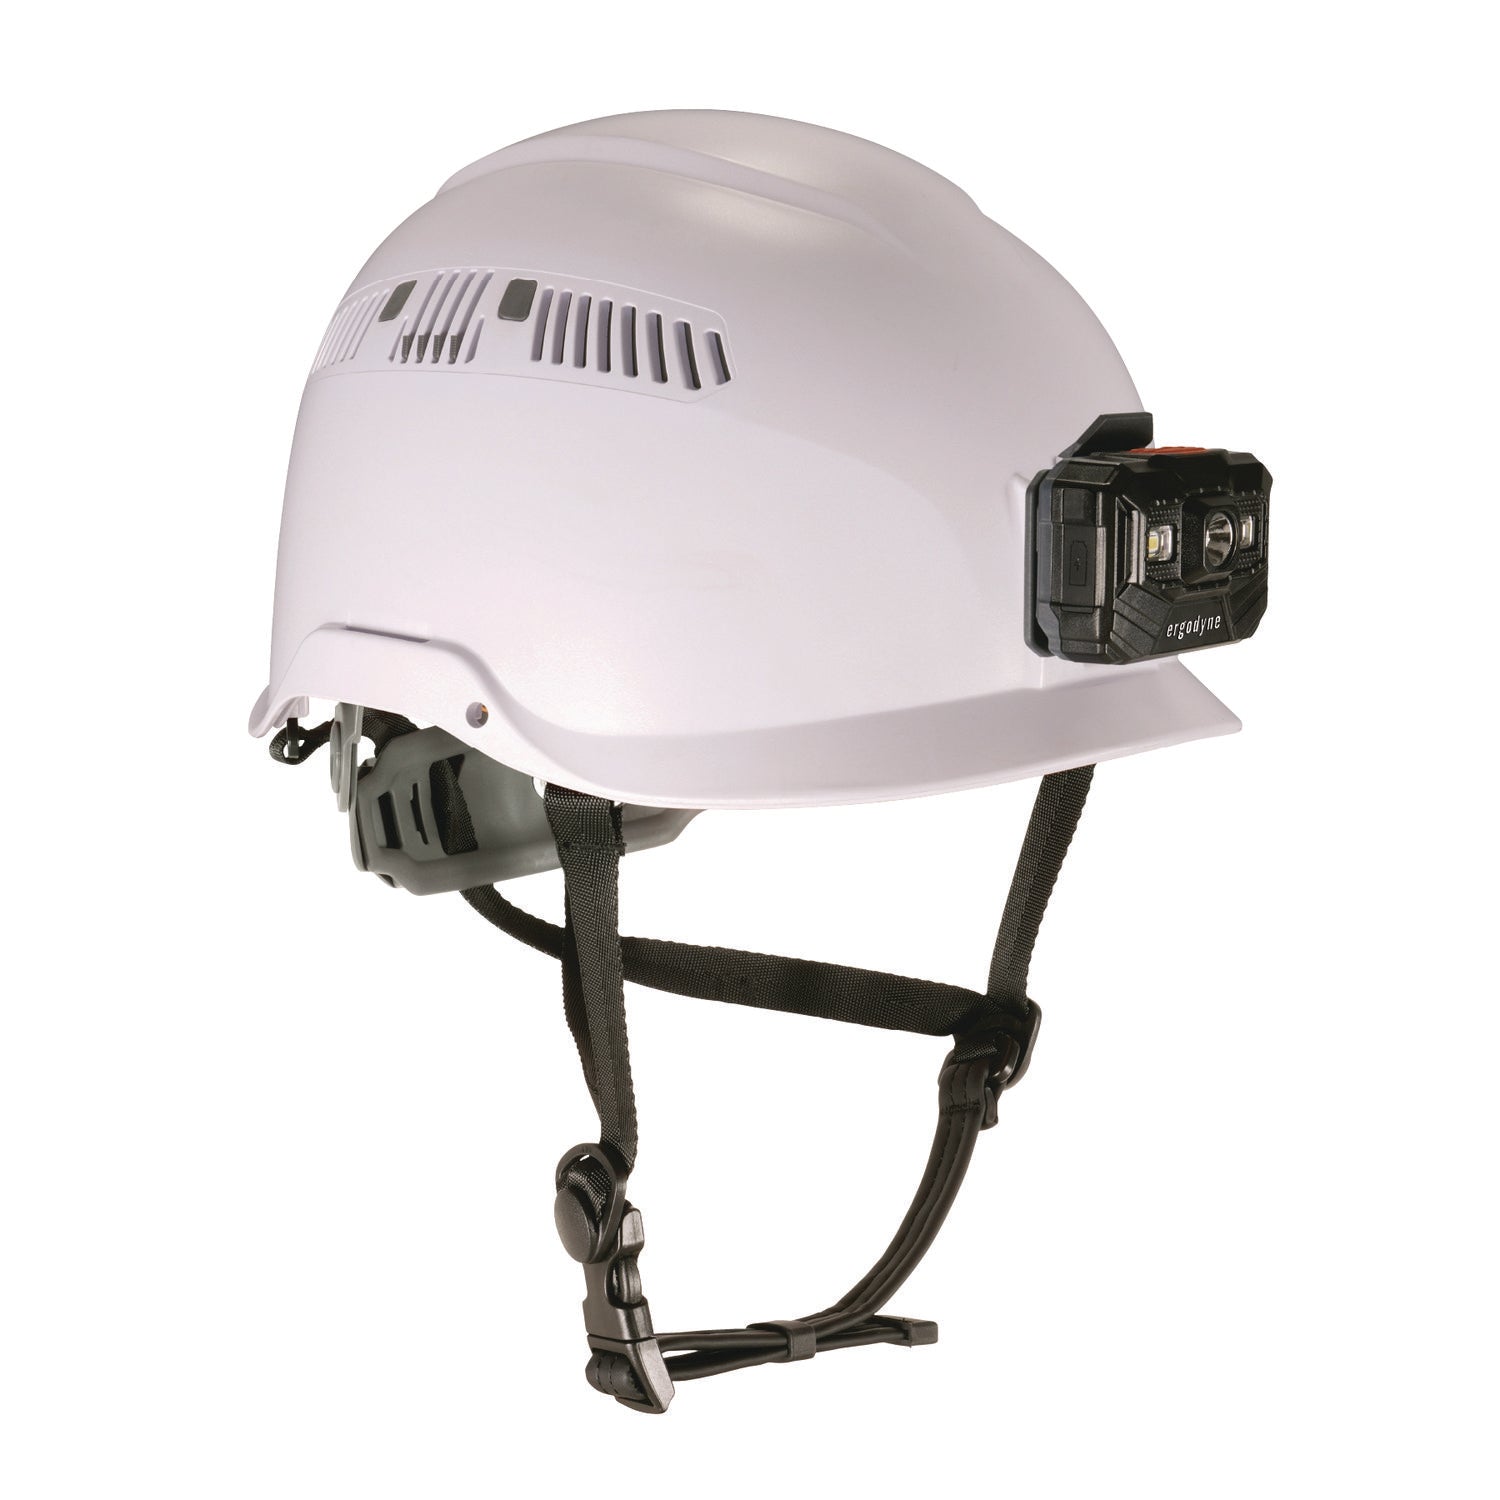 class-c-safety-helmet-with-led-light-and-adjustable-venting-6-point-rachet-suspension-white-ships-in-1-3-business-days_ego60265 - 1